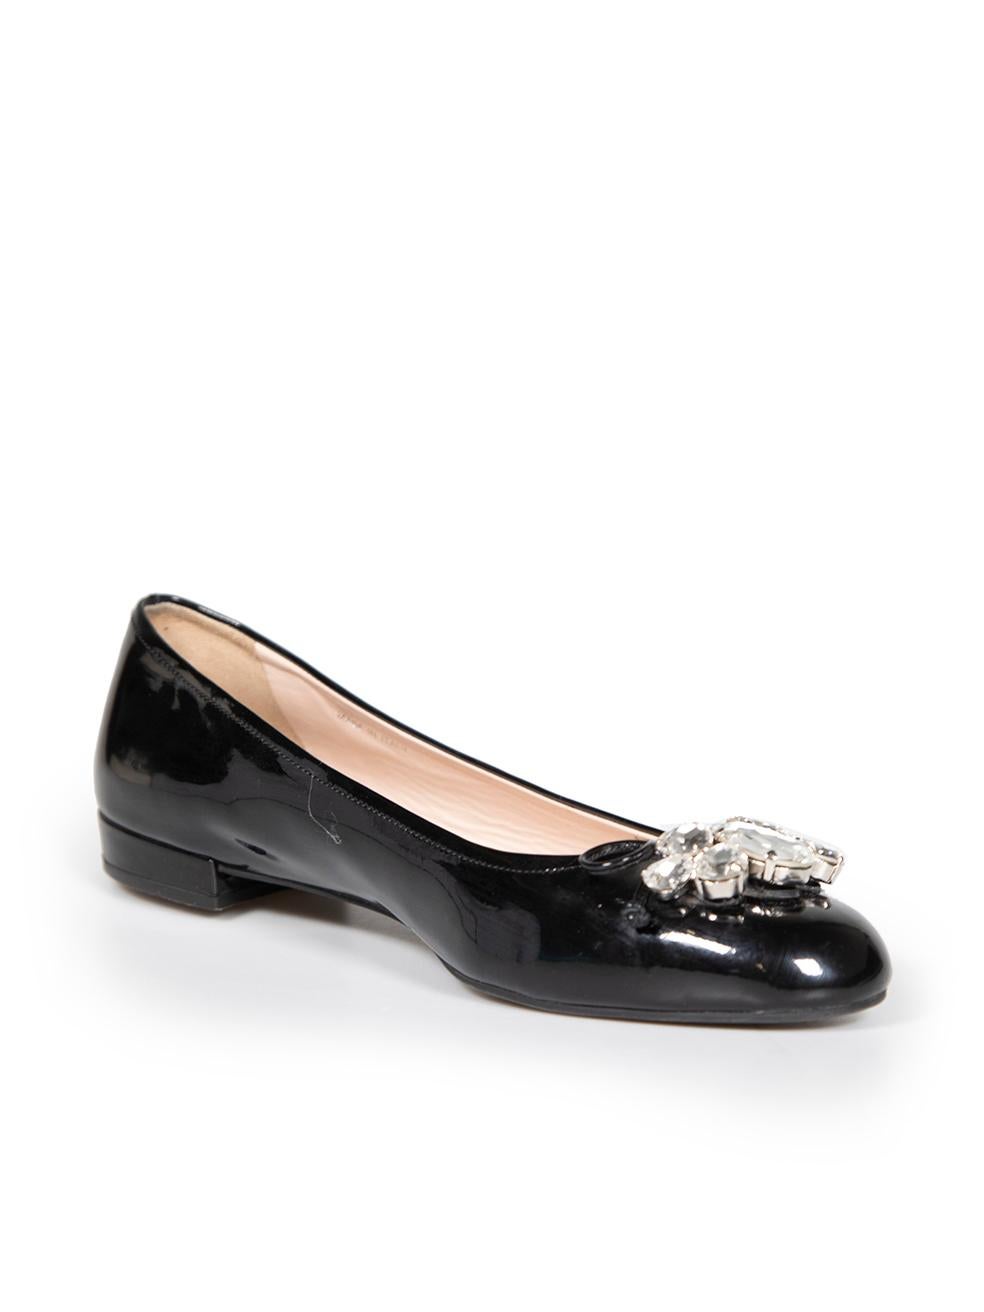 CONDITION is Very good. Minimal wear to shoes is evident. Minimal wear to the uppers with a number of light scratch marks found on this used Miu Miu designer resale item.
 
 
 
 Details
 
 
 Black
 
 Patent leather
 
 Ballet flats
 
 Round toe
 
